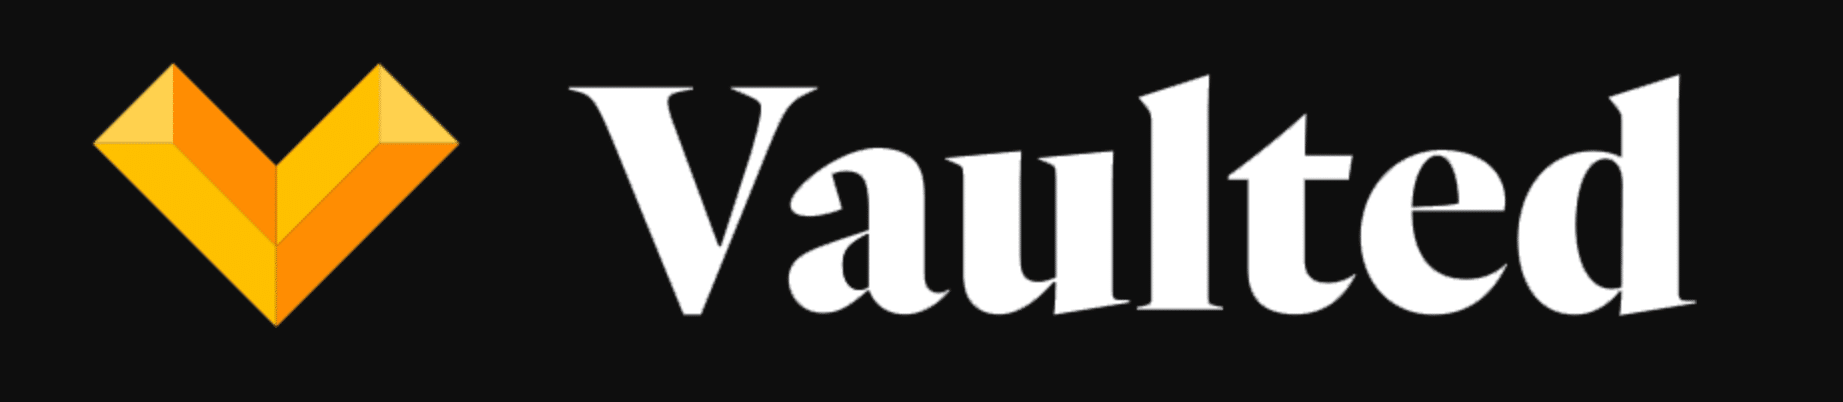 Vaulted coupon codes, promo codes and deals